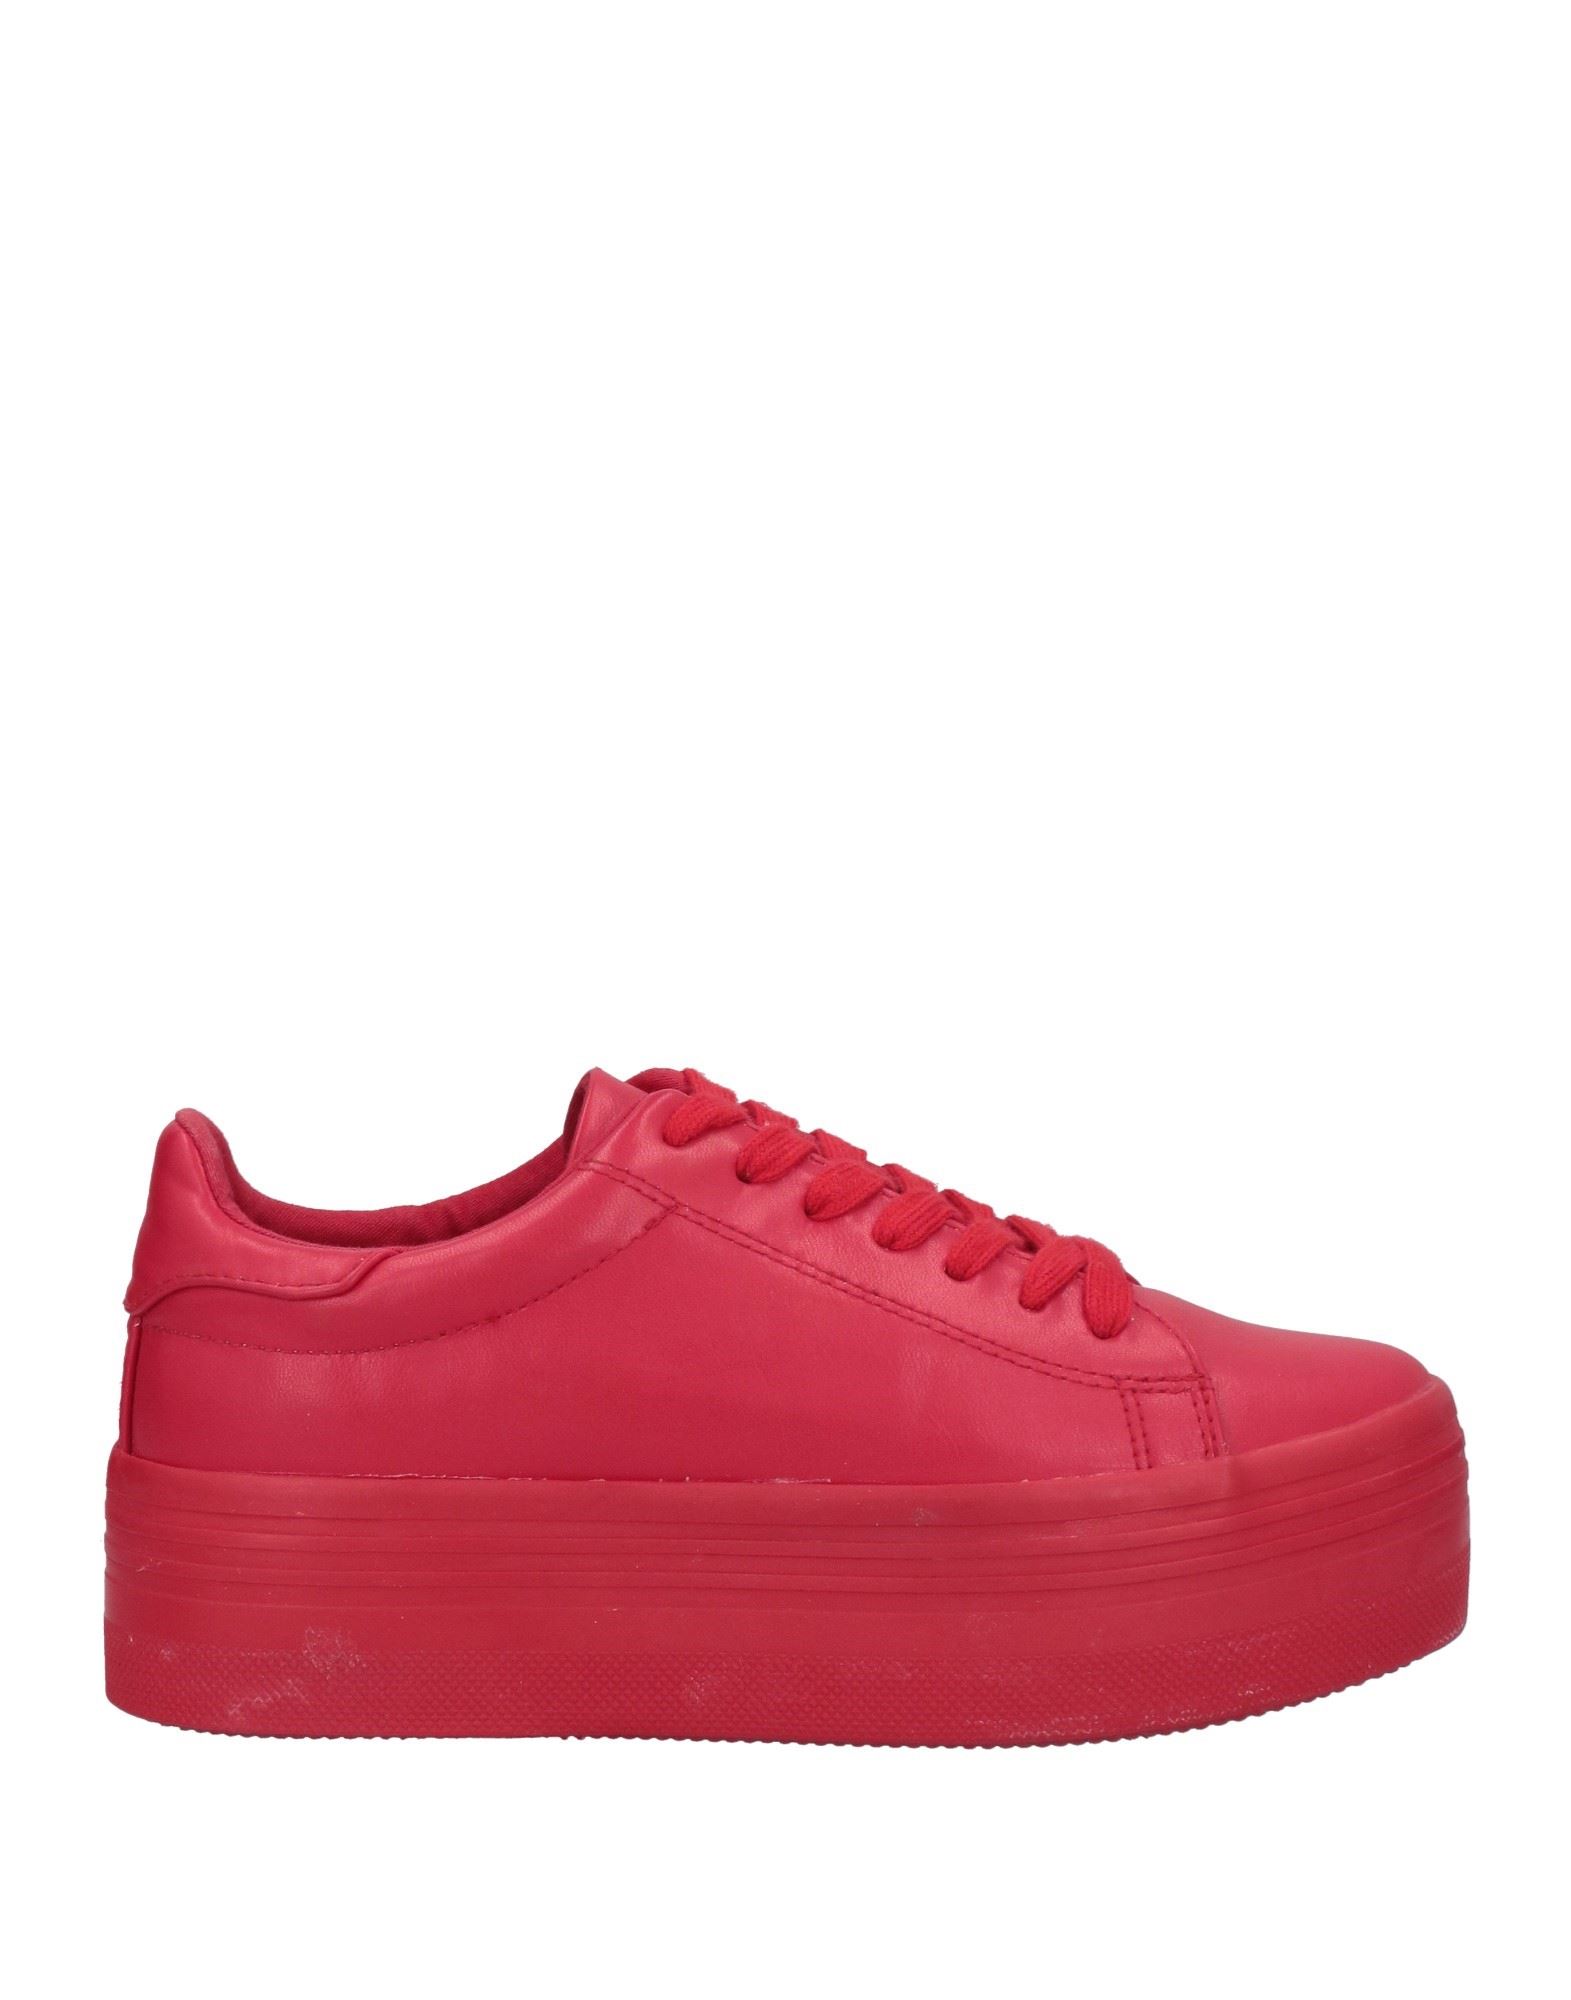 Career Empirical Bathtub Jc Play By Jeffrey Campbell Sneakers In Red | ModeSens